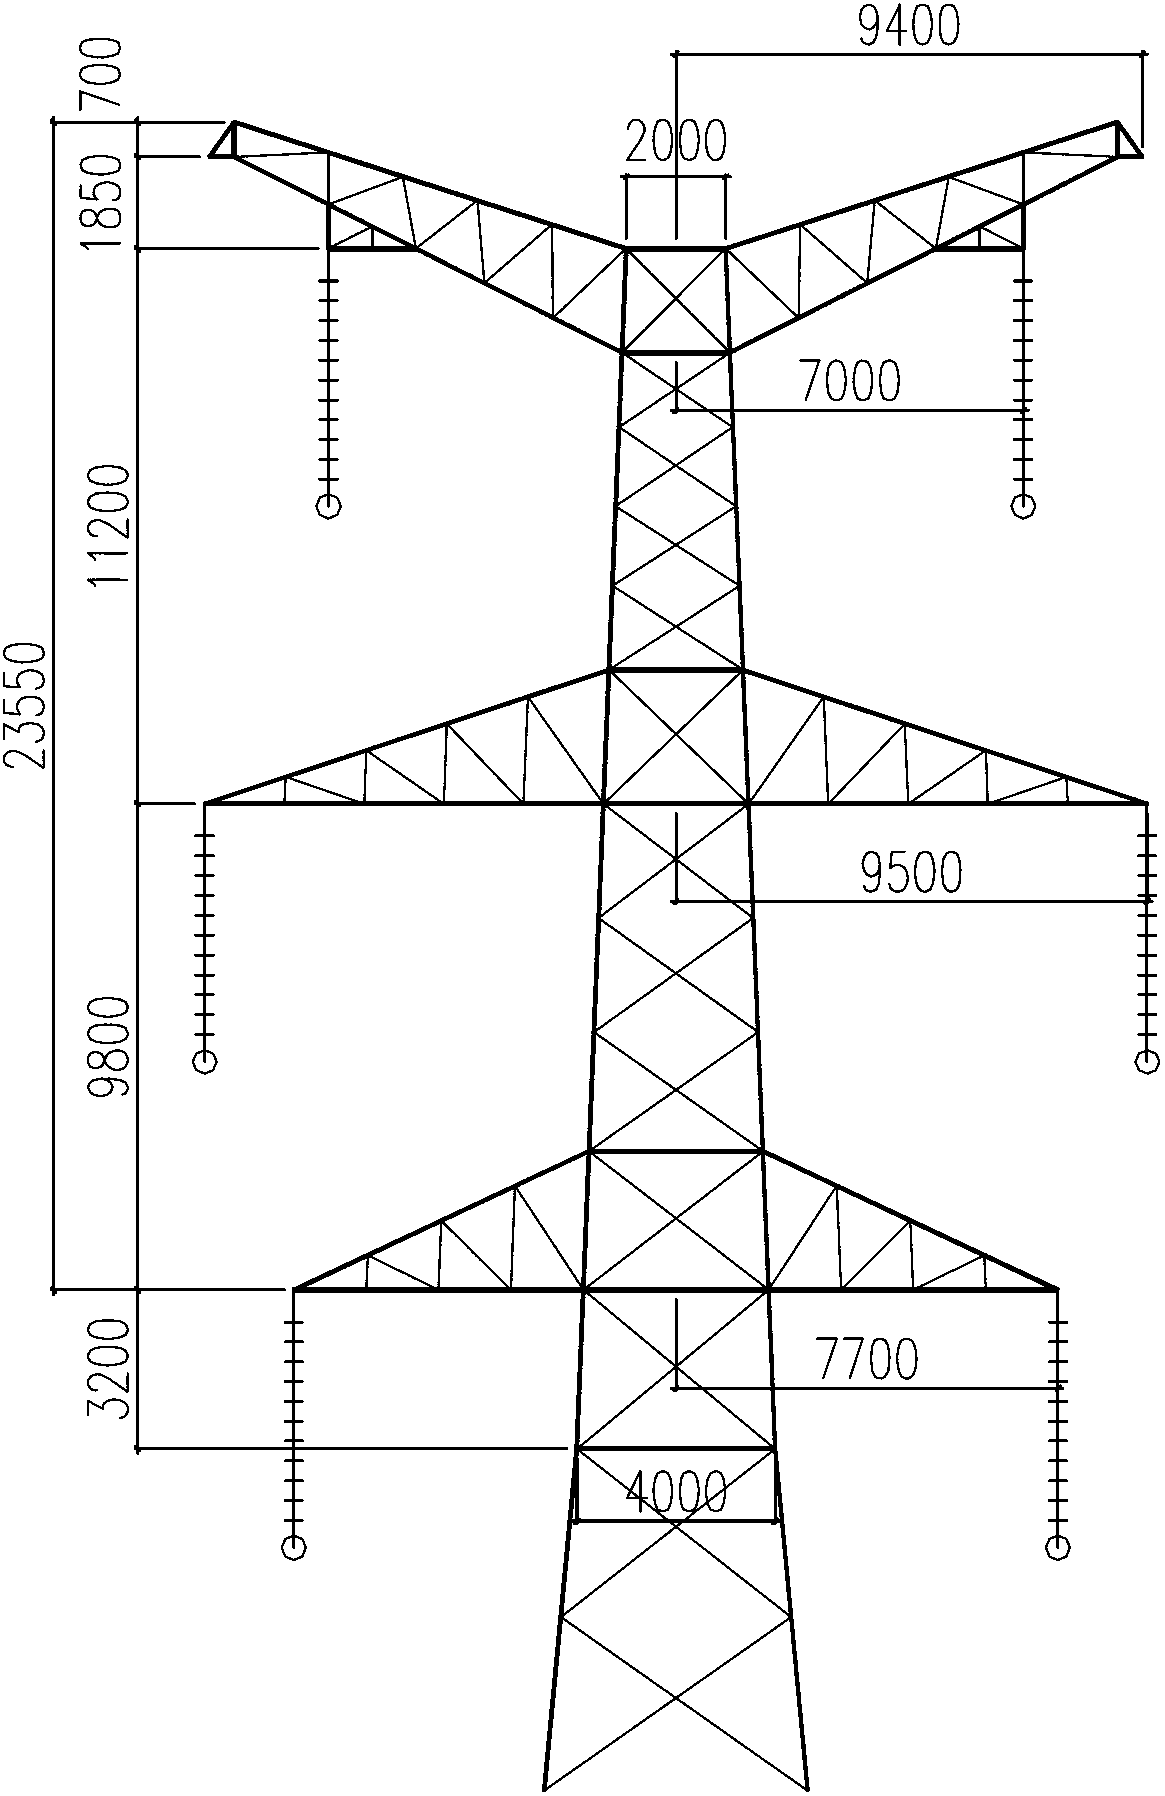 Double loop VIV (vortex induced vibration) string-drum-shaped tangent tower